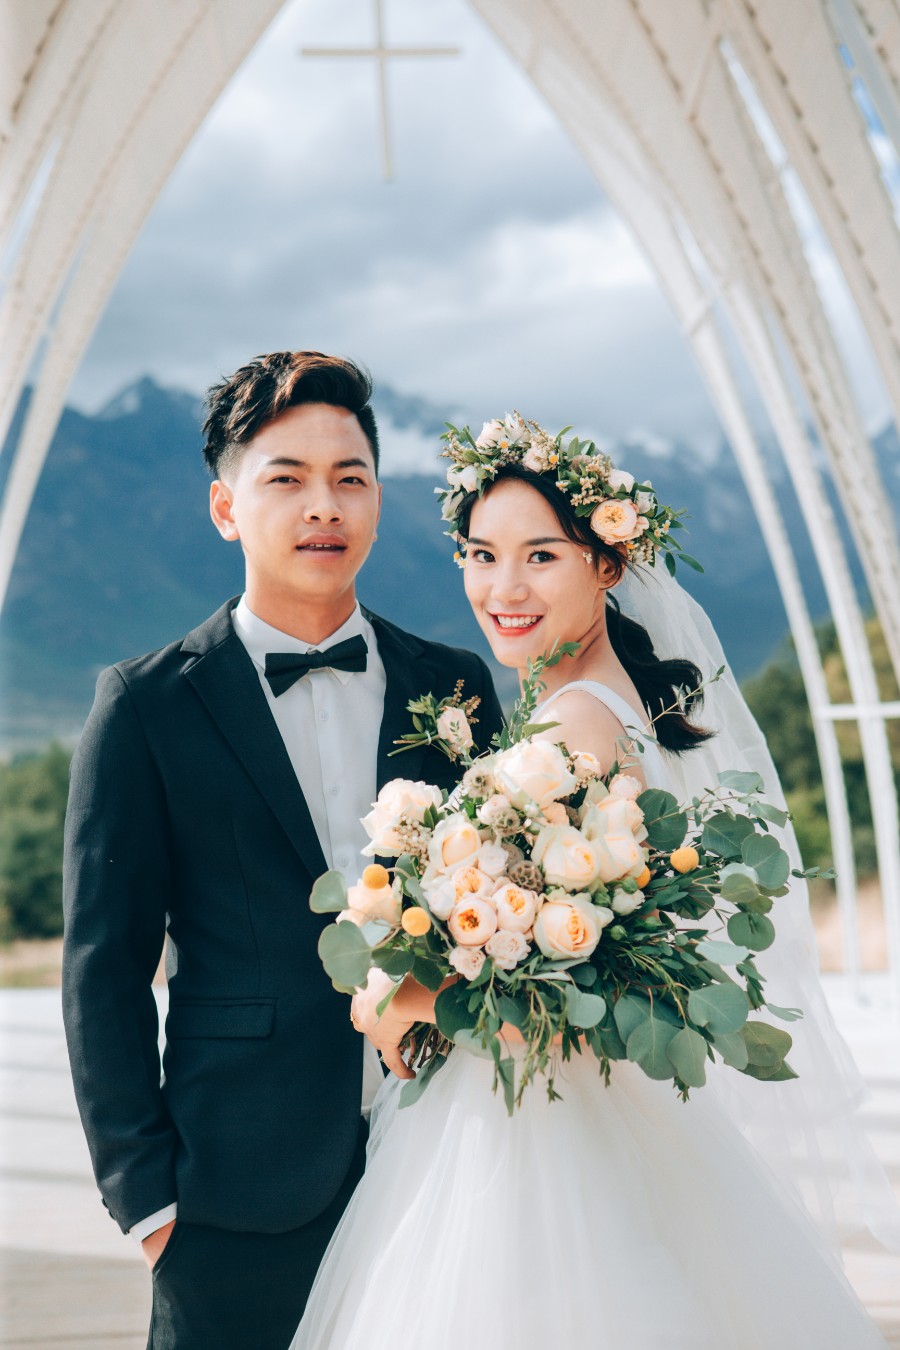 Yunnan Outdoor Pre-Wedding Photoshoot At Lijiang Jade Dragon Mountain & Ancient Town by Cao on OneThreeOneFour 20